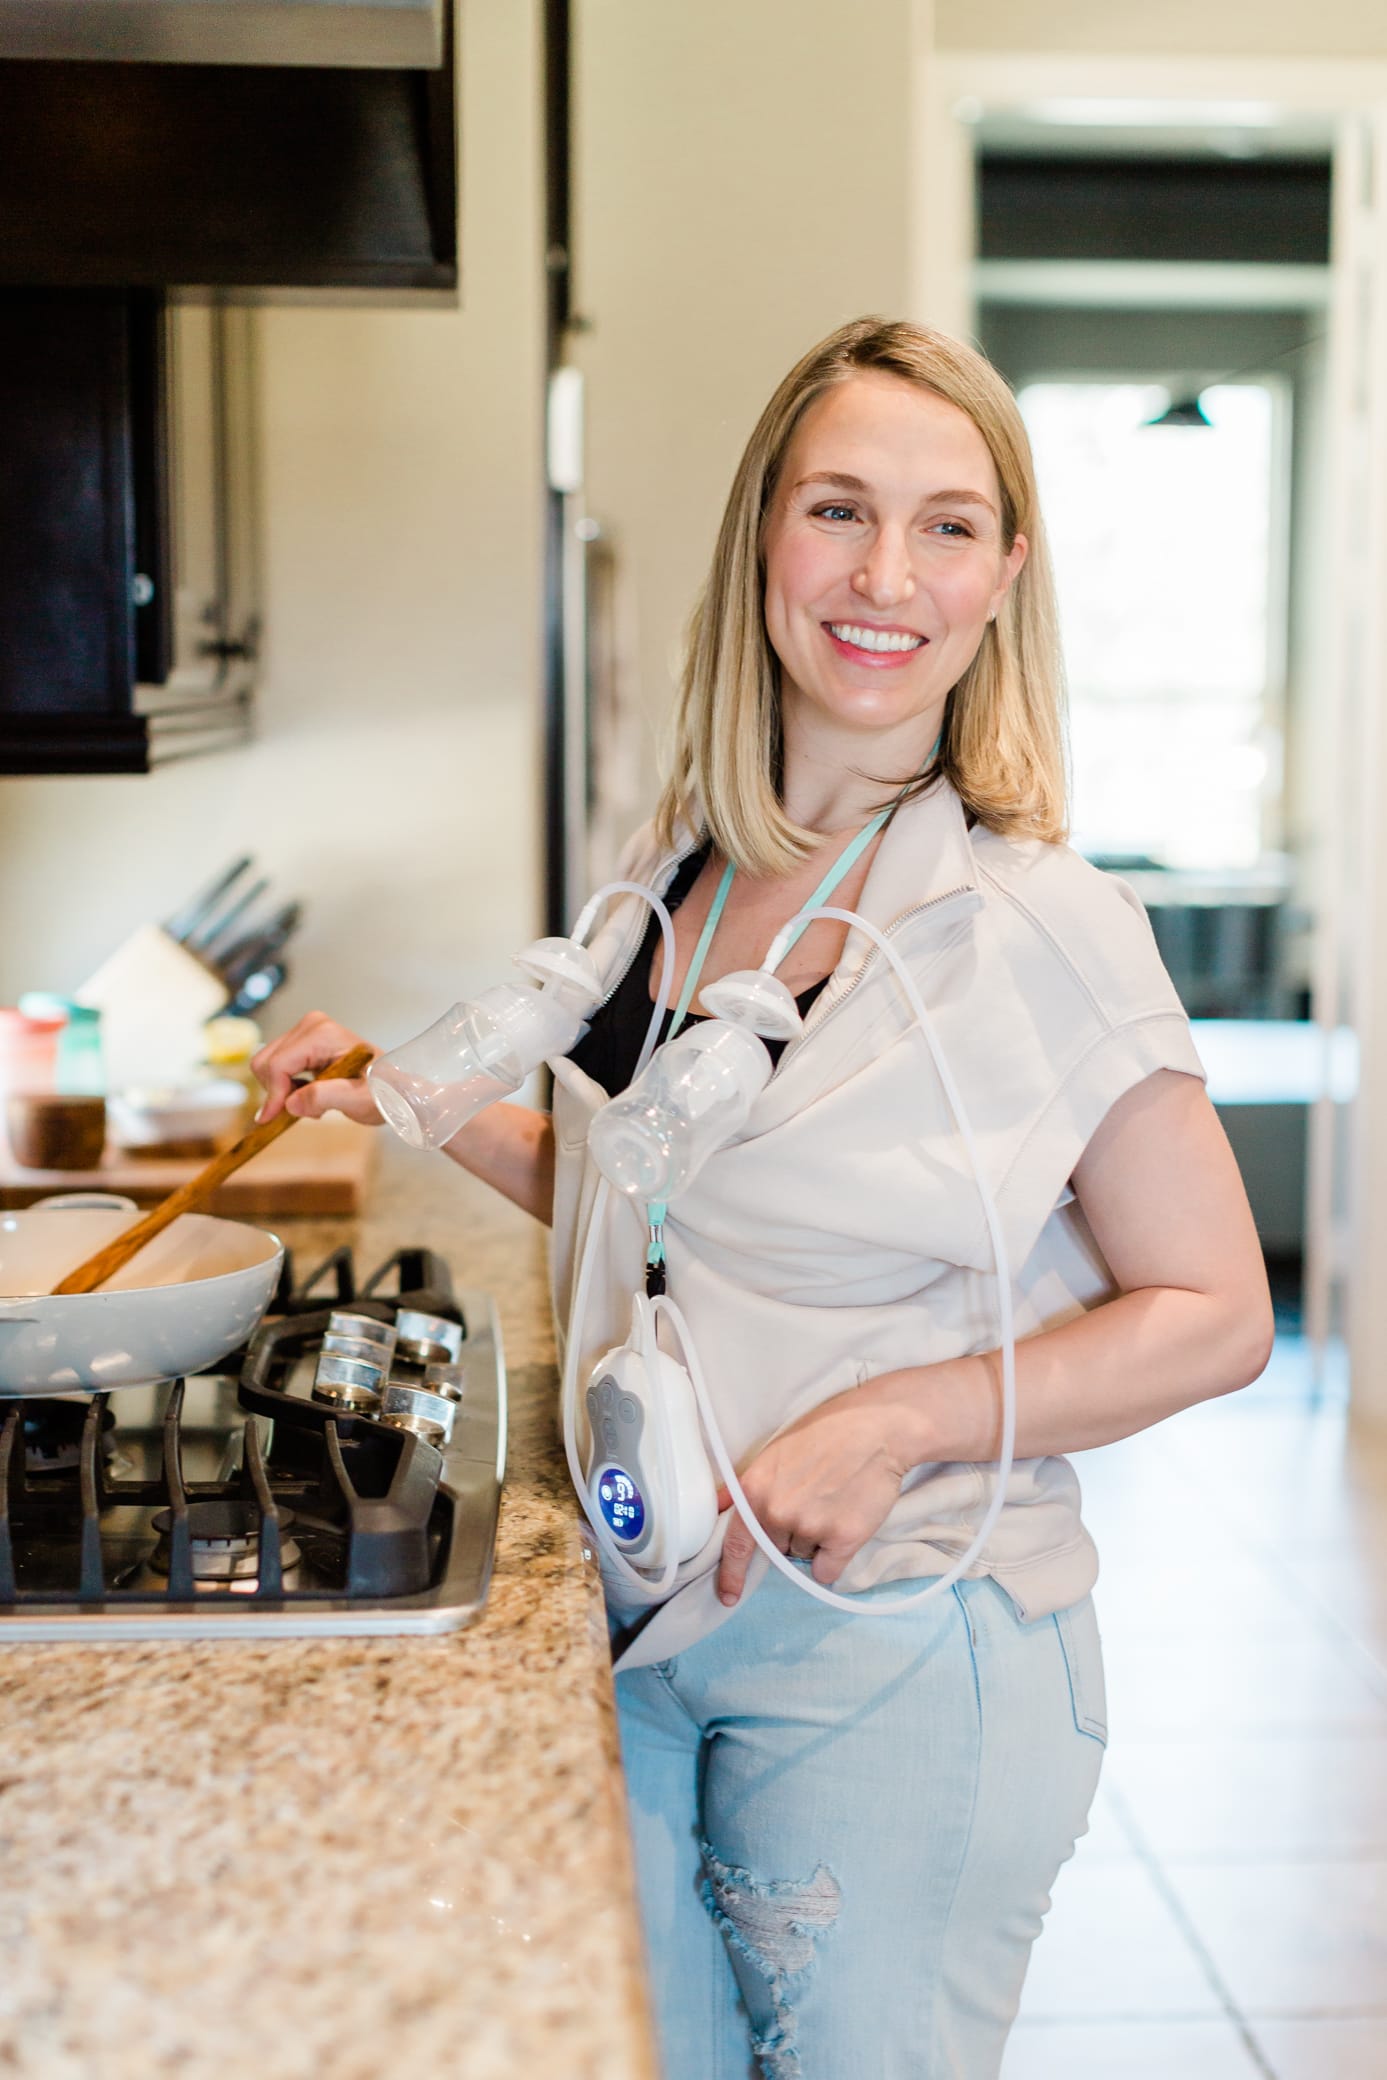 Mom cooking dinner and pumping with her Motif Duo breast pump.